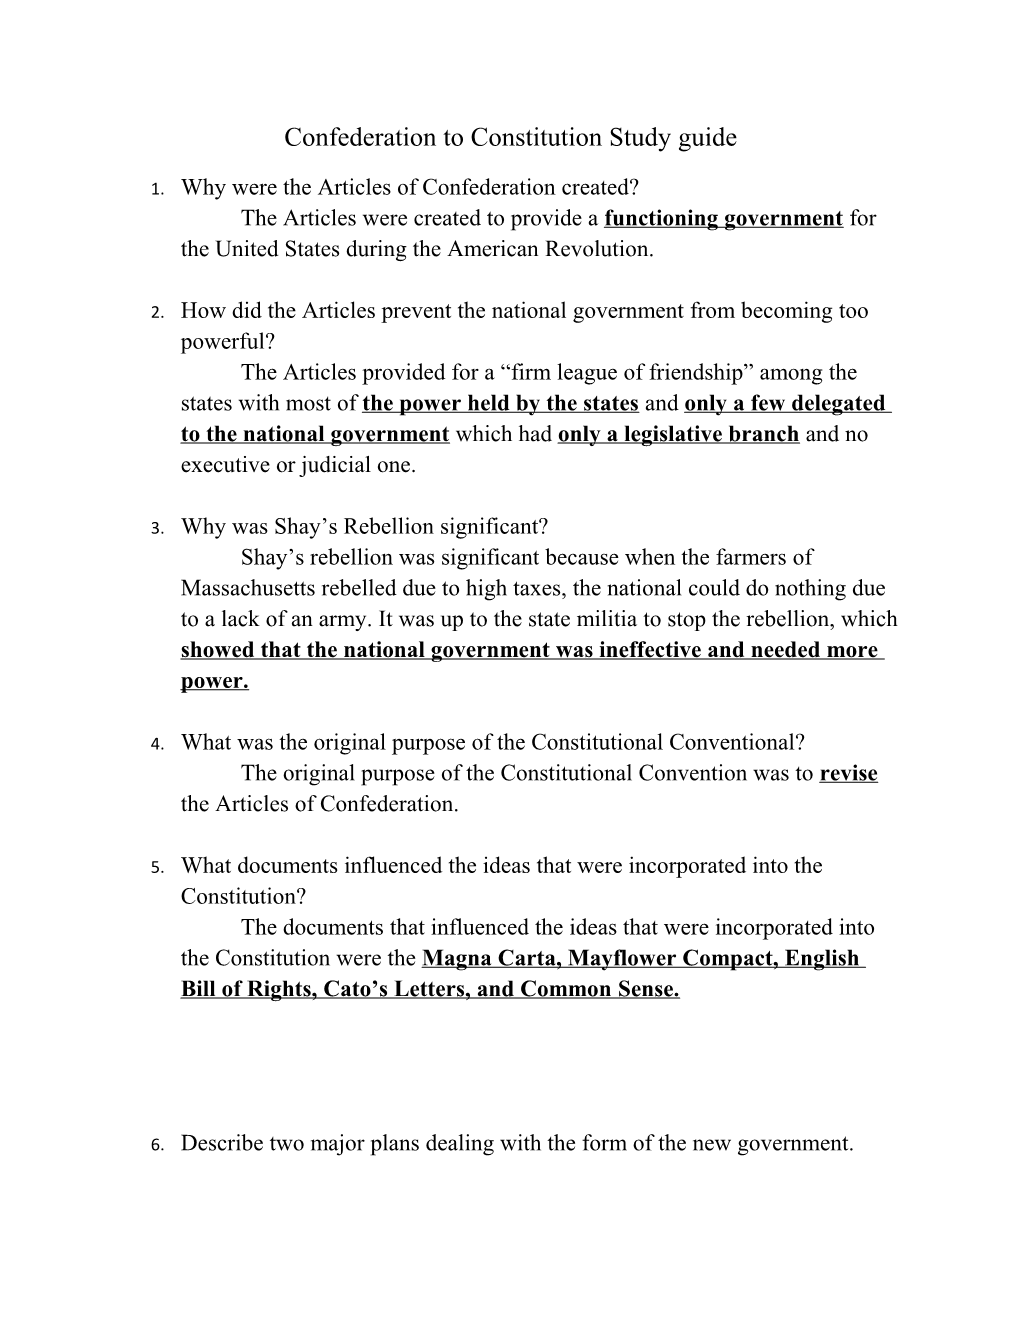 Confederation to Constitution Study Guide